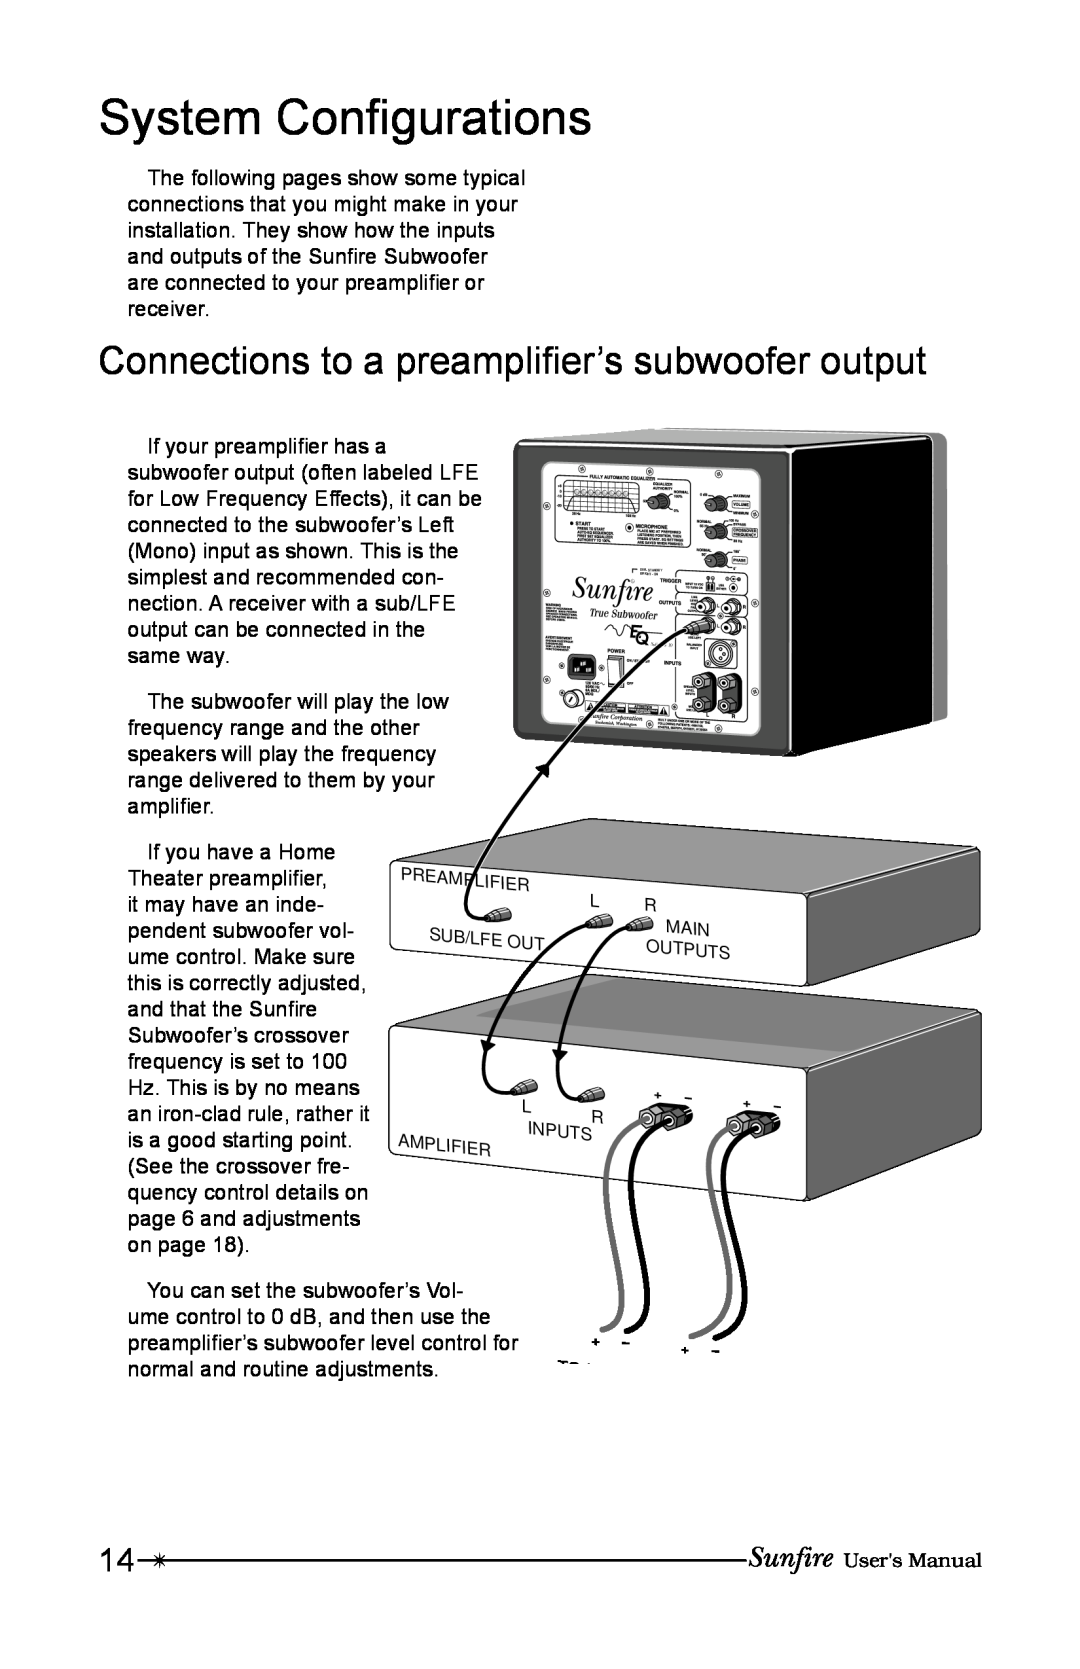 Sunfire 12 user manual System ConÞgurations, Connections to a preampliÞer’s subwoofer output 